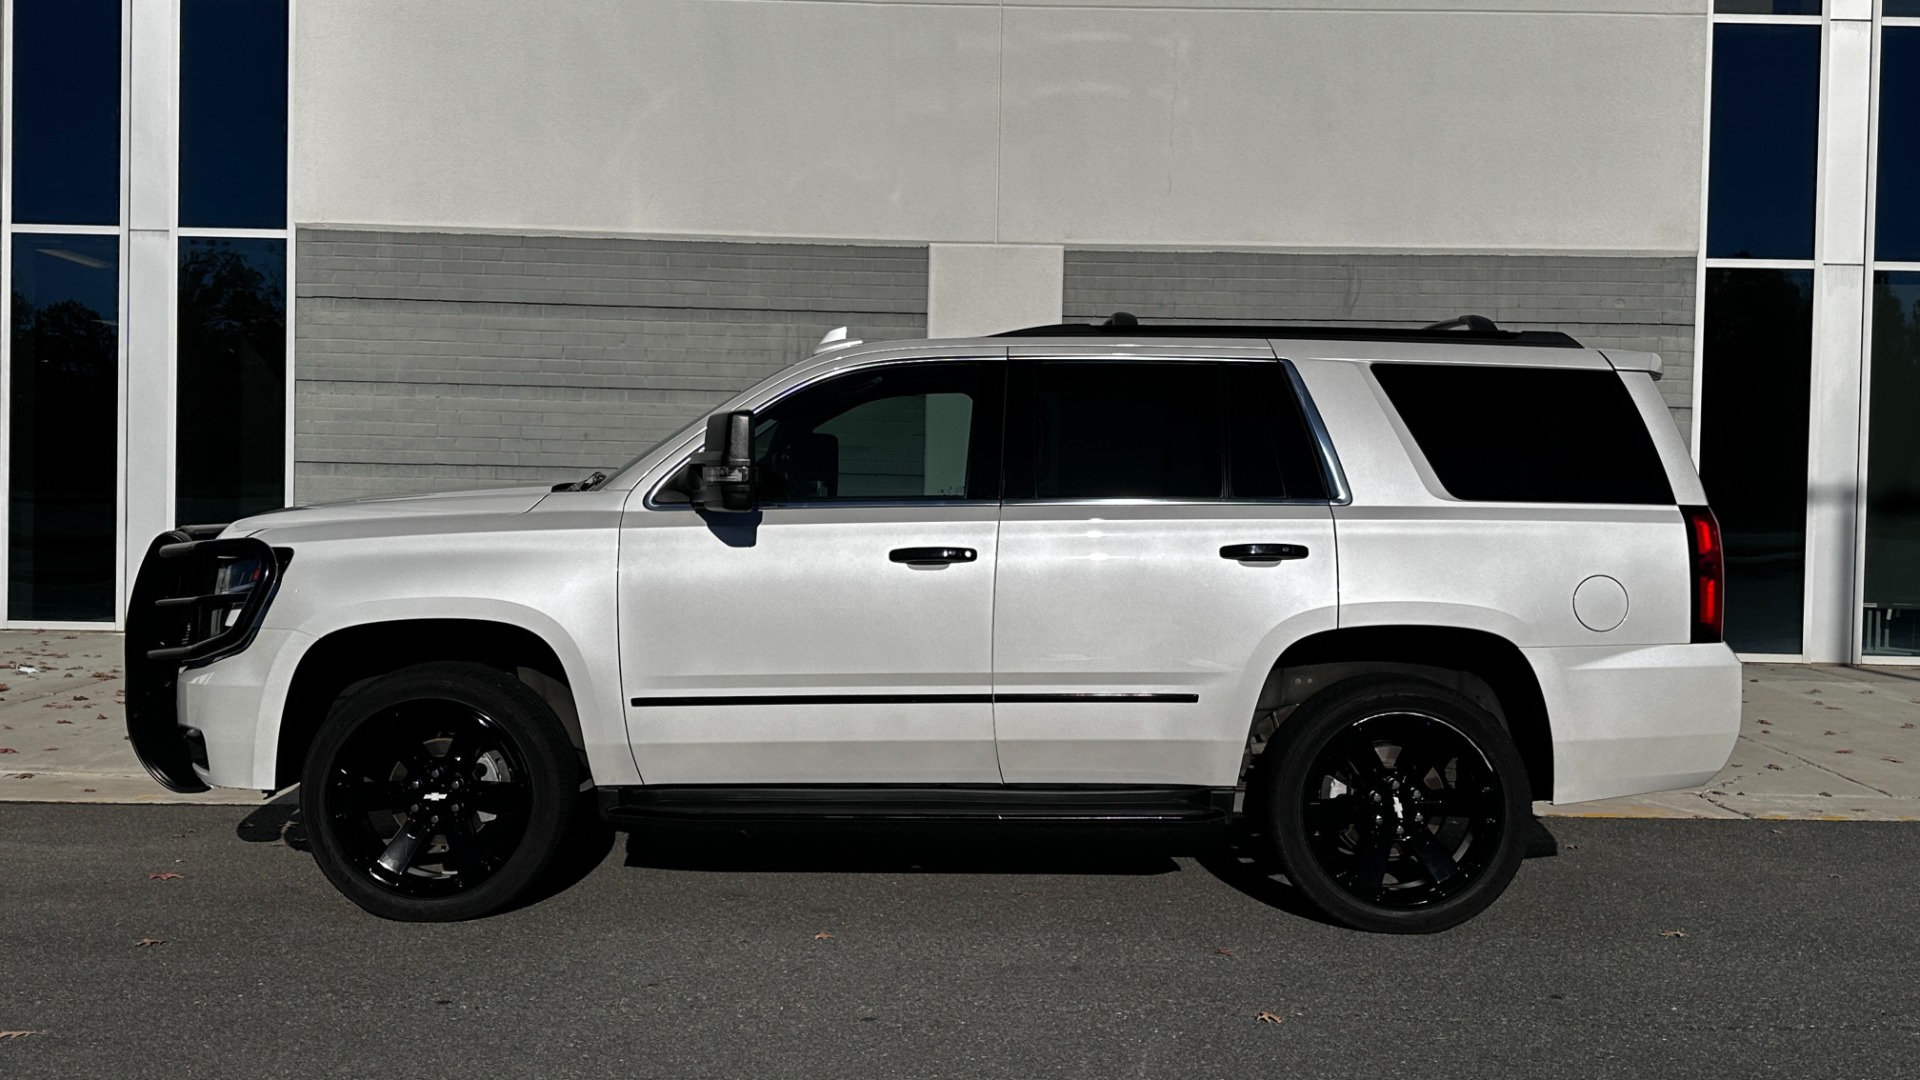 Used 2017 Chevrolet Tahoe PREMIER / LEATHER / DVD / 3RD ROW / NAVIGATION for sale $35,995 at Formula Imports in Charlotte NC 28227 4